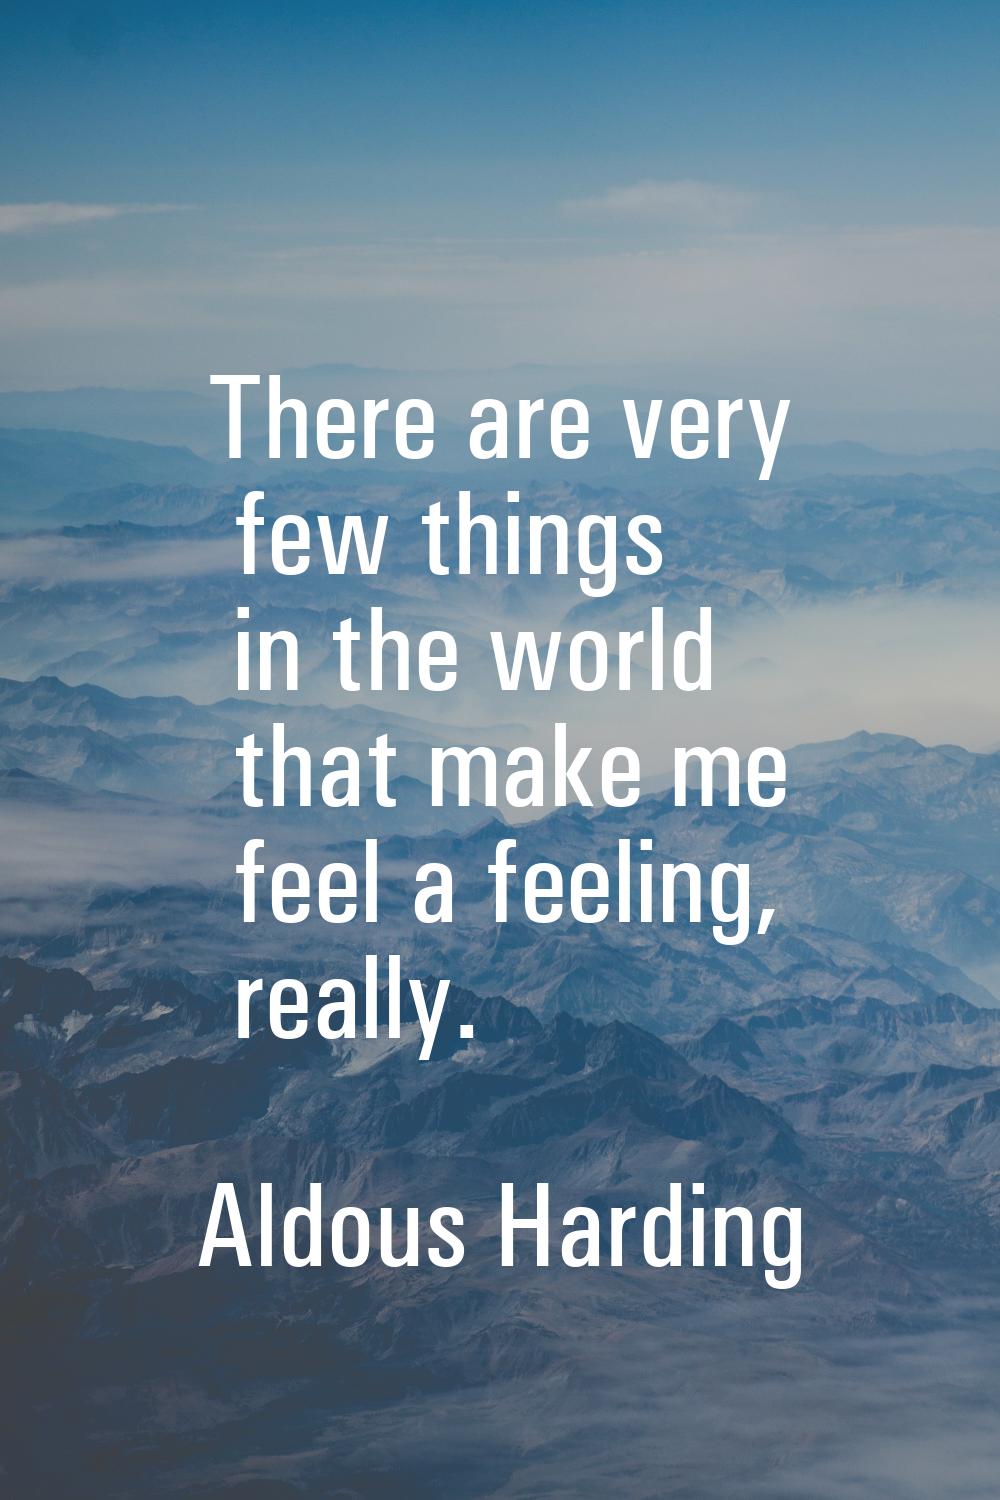 There are very few things in the world that make me feel a feeling, really.